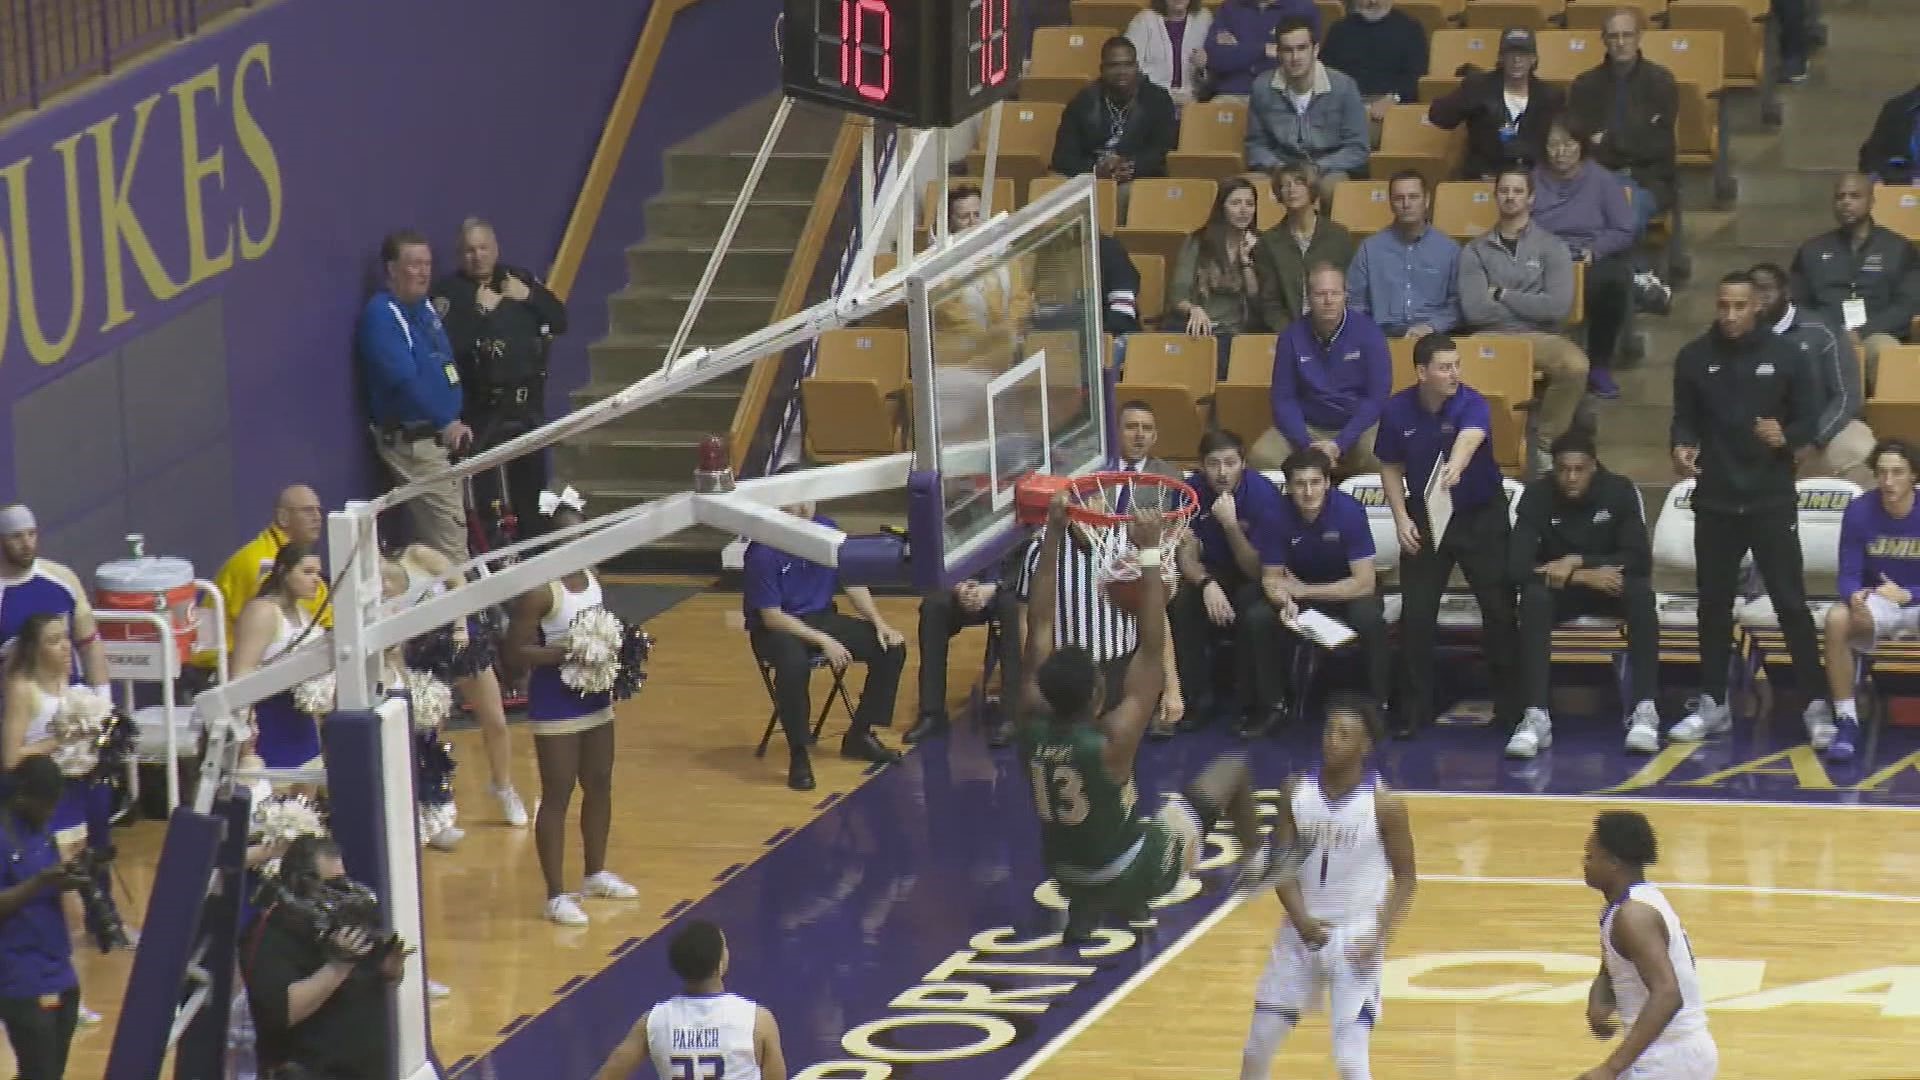 William & Mary won its fifth consecutive game as they beat JMU on the road 70-66 spoiling Senior Day for the Dukes.